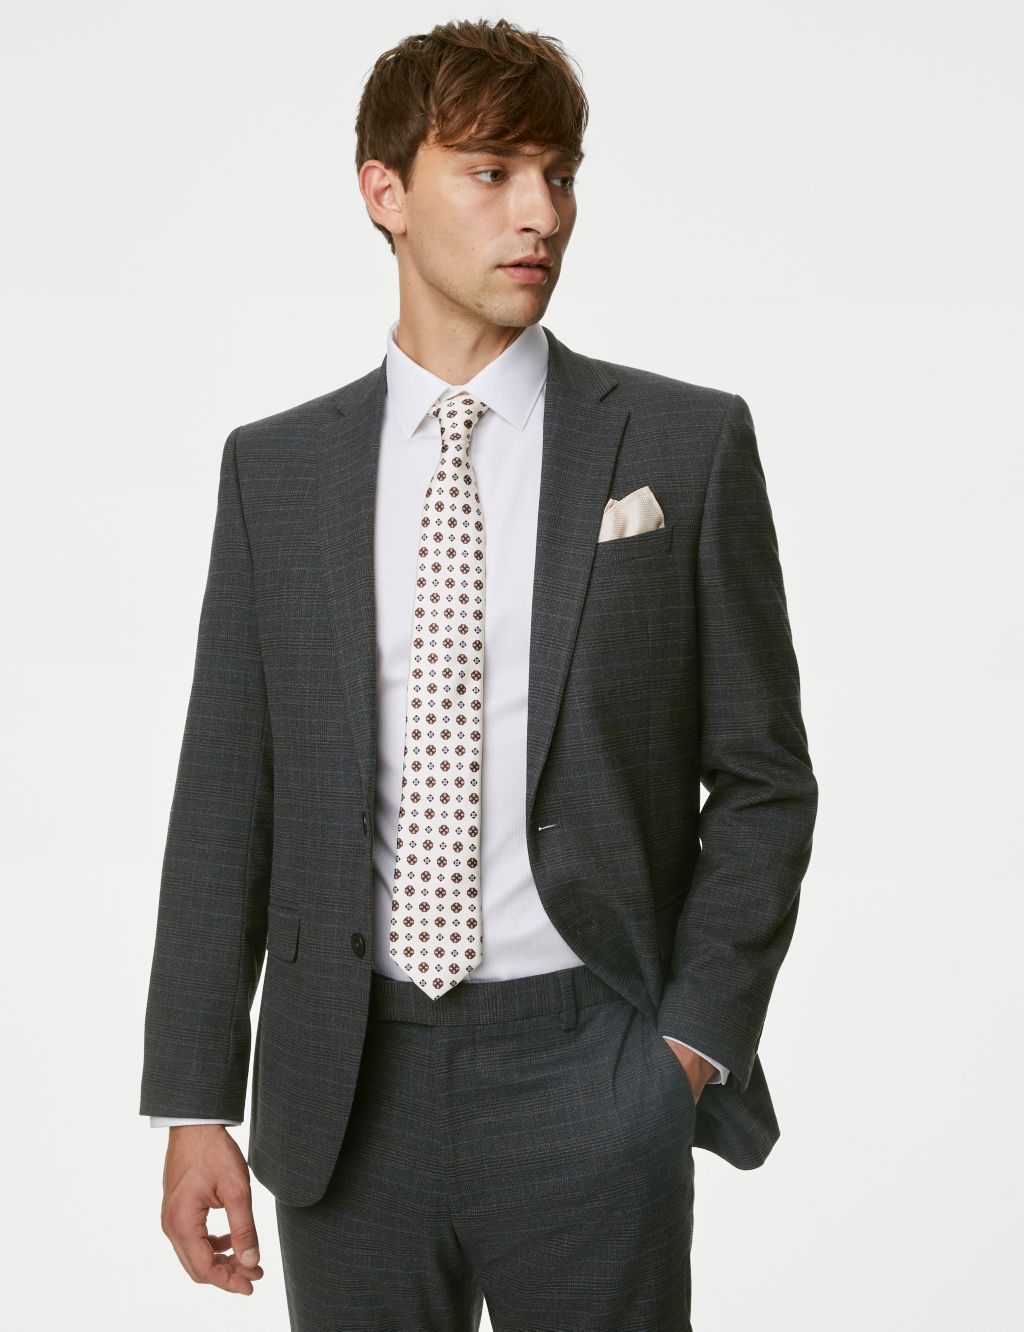 Slim Fit Prince of Wales Check Suit image 2